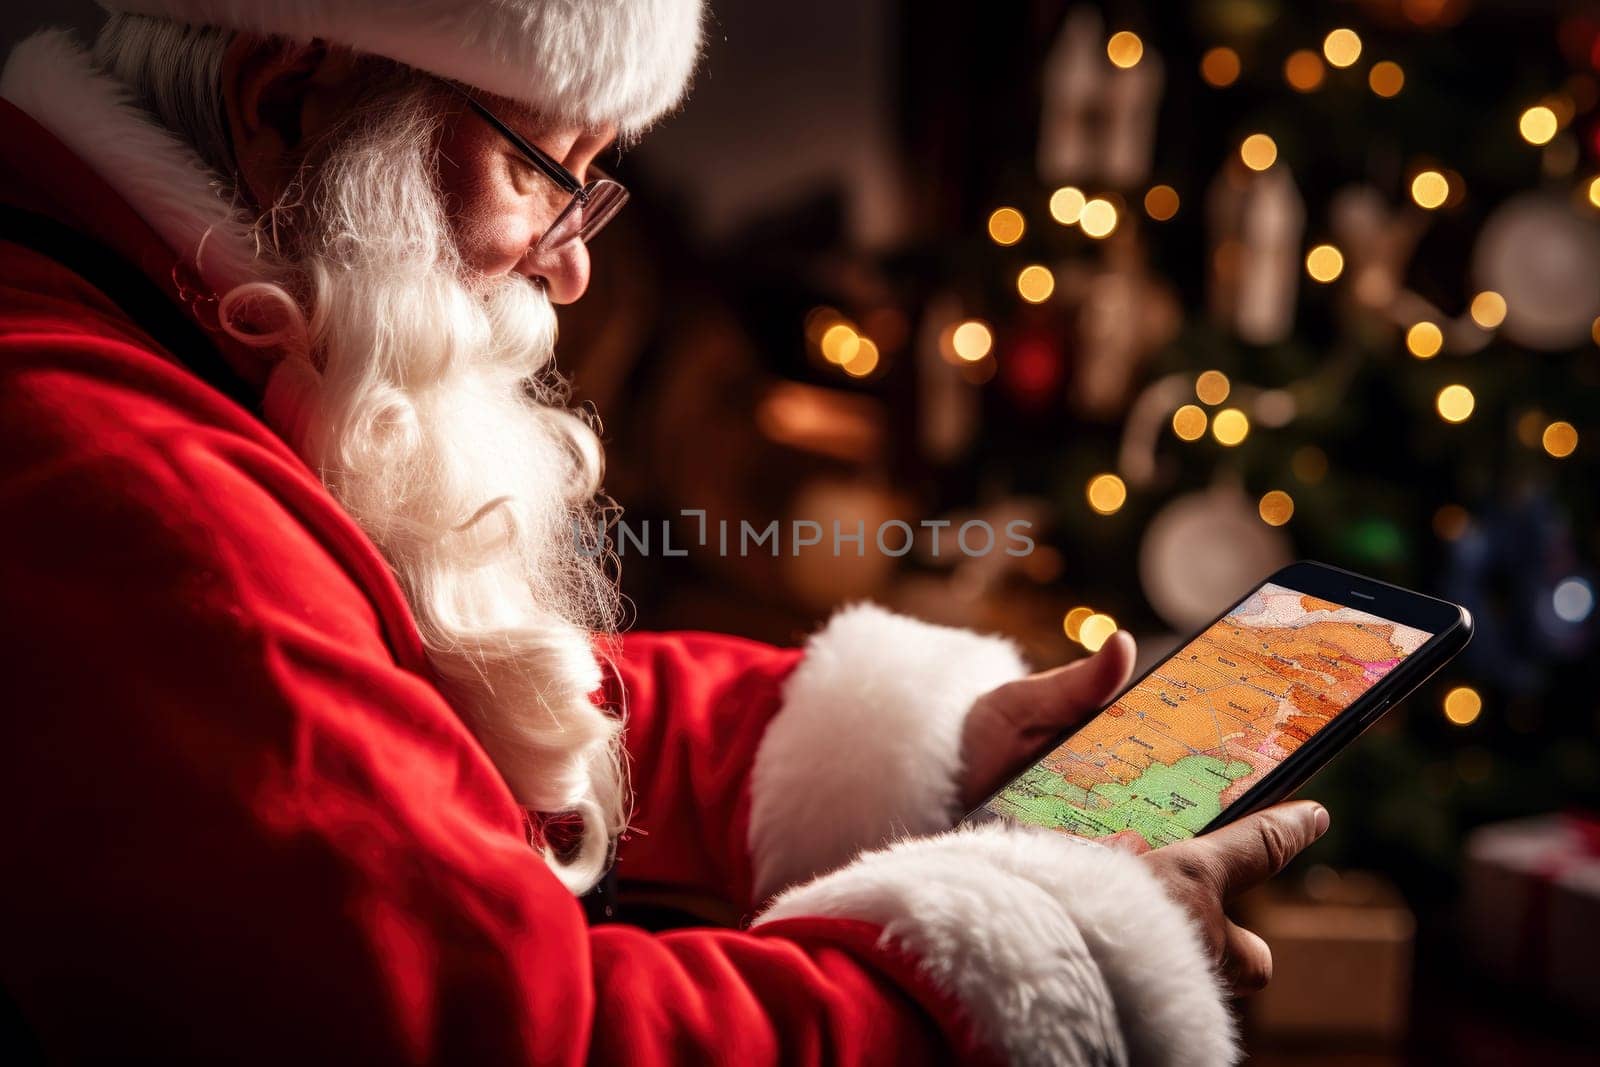 Santa Claus uses a tablet computer to order gifts and use GPS to find addresses to wish him a Merry Christmas